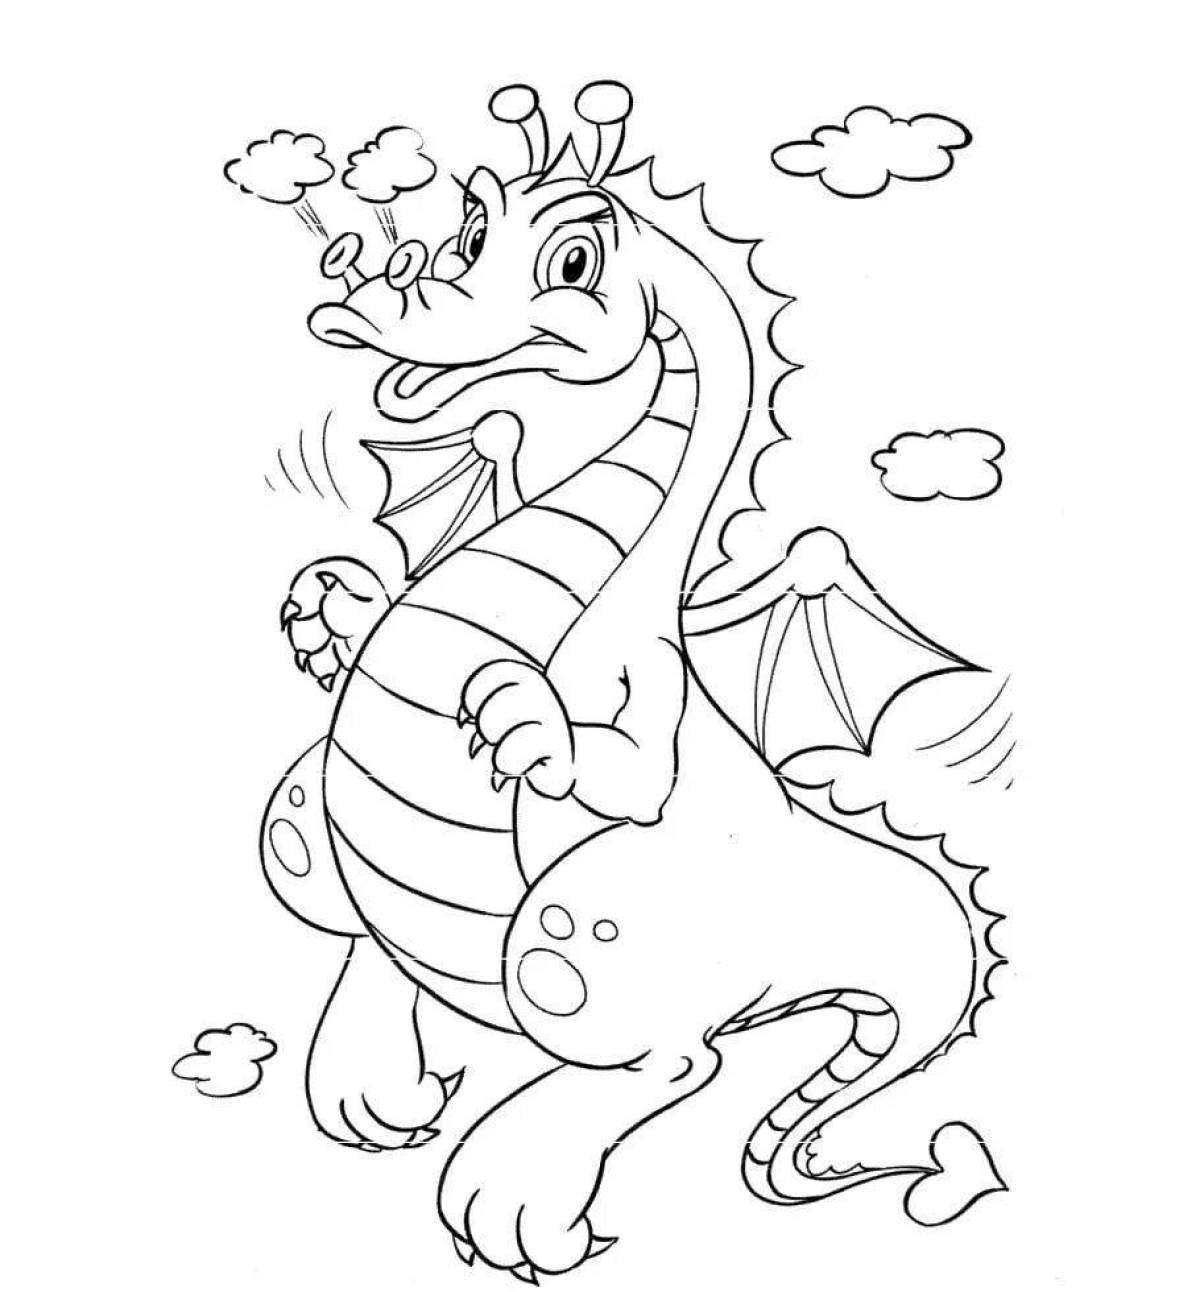 Magic coloring dragons for children 6-7 years old